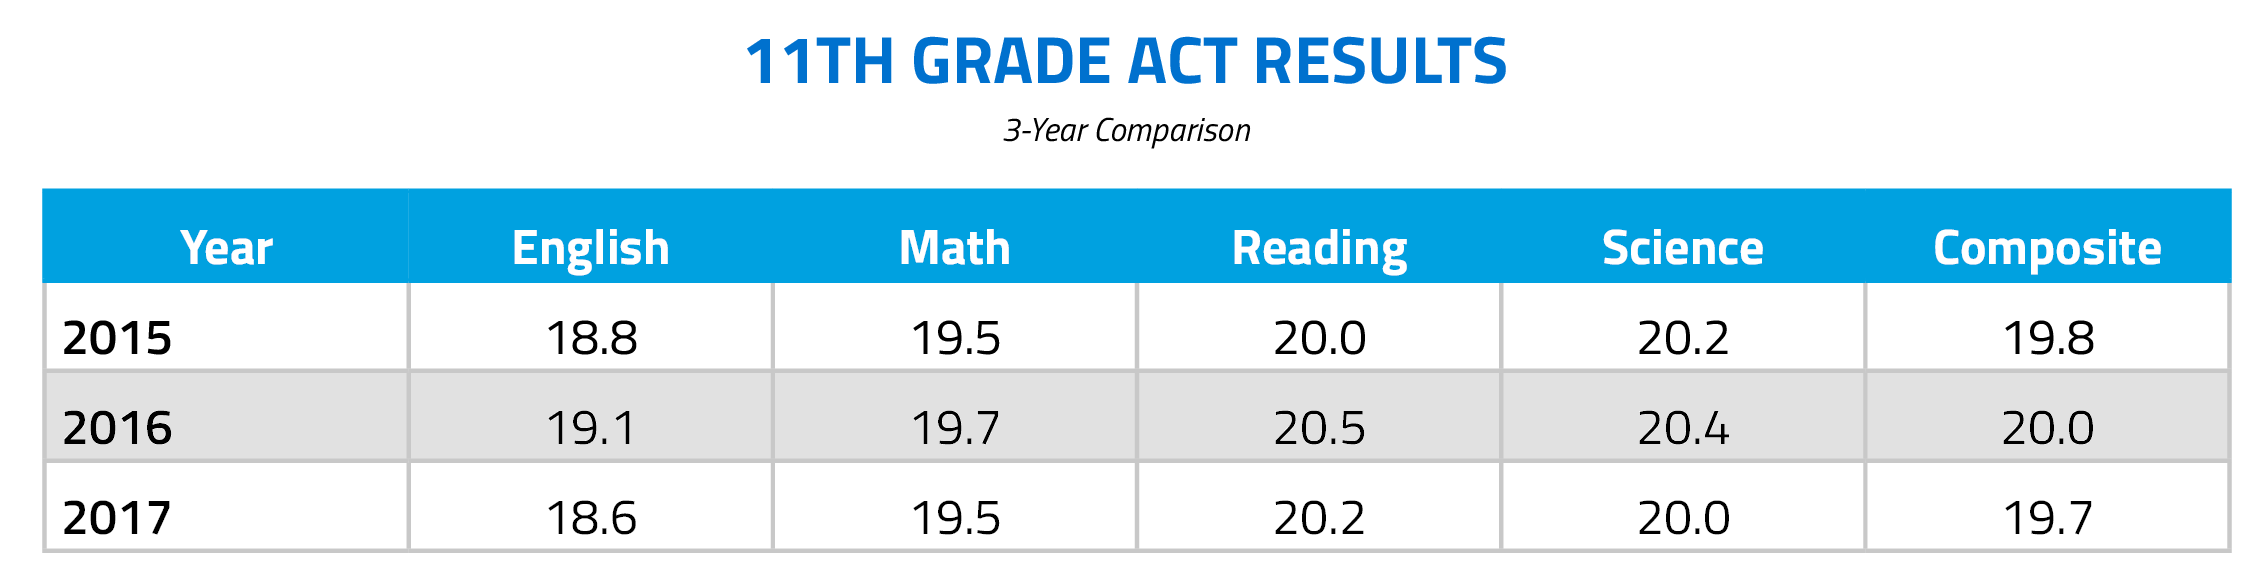 11th Grade ACT Results. 3-year comparison..